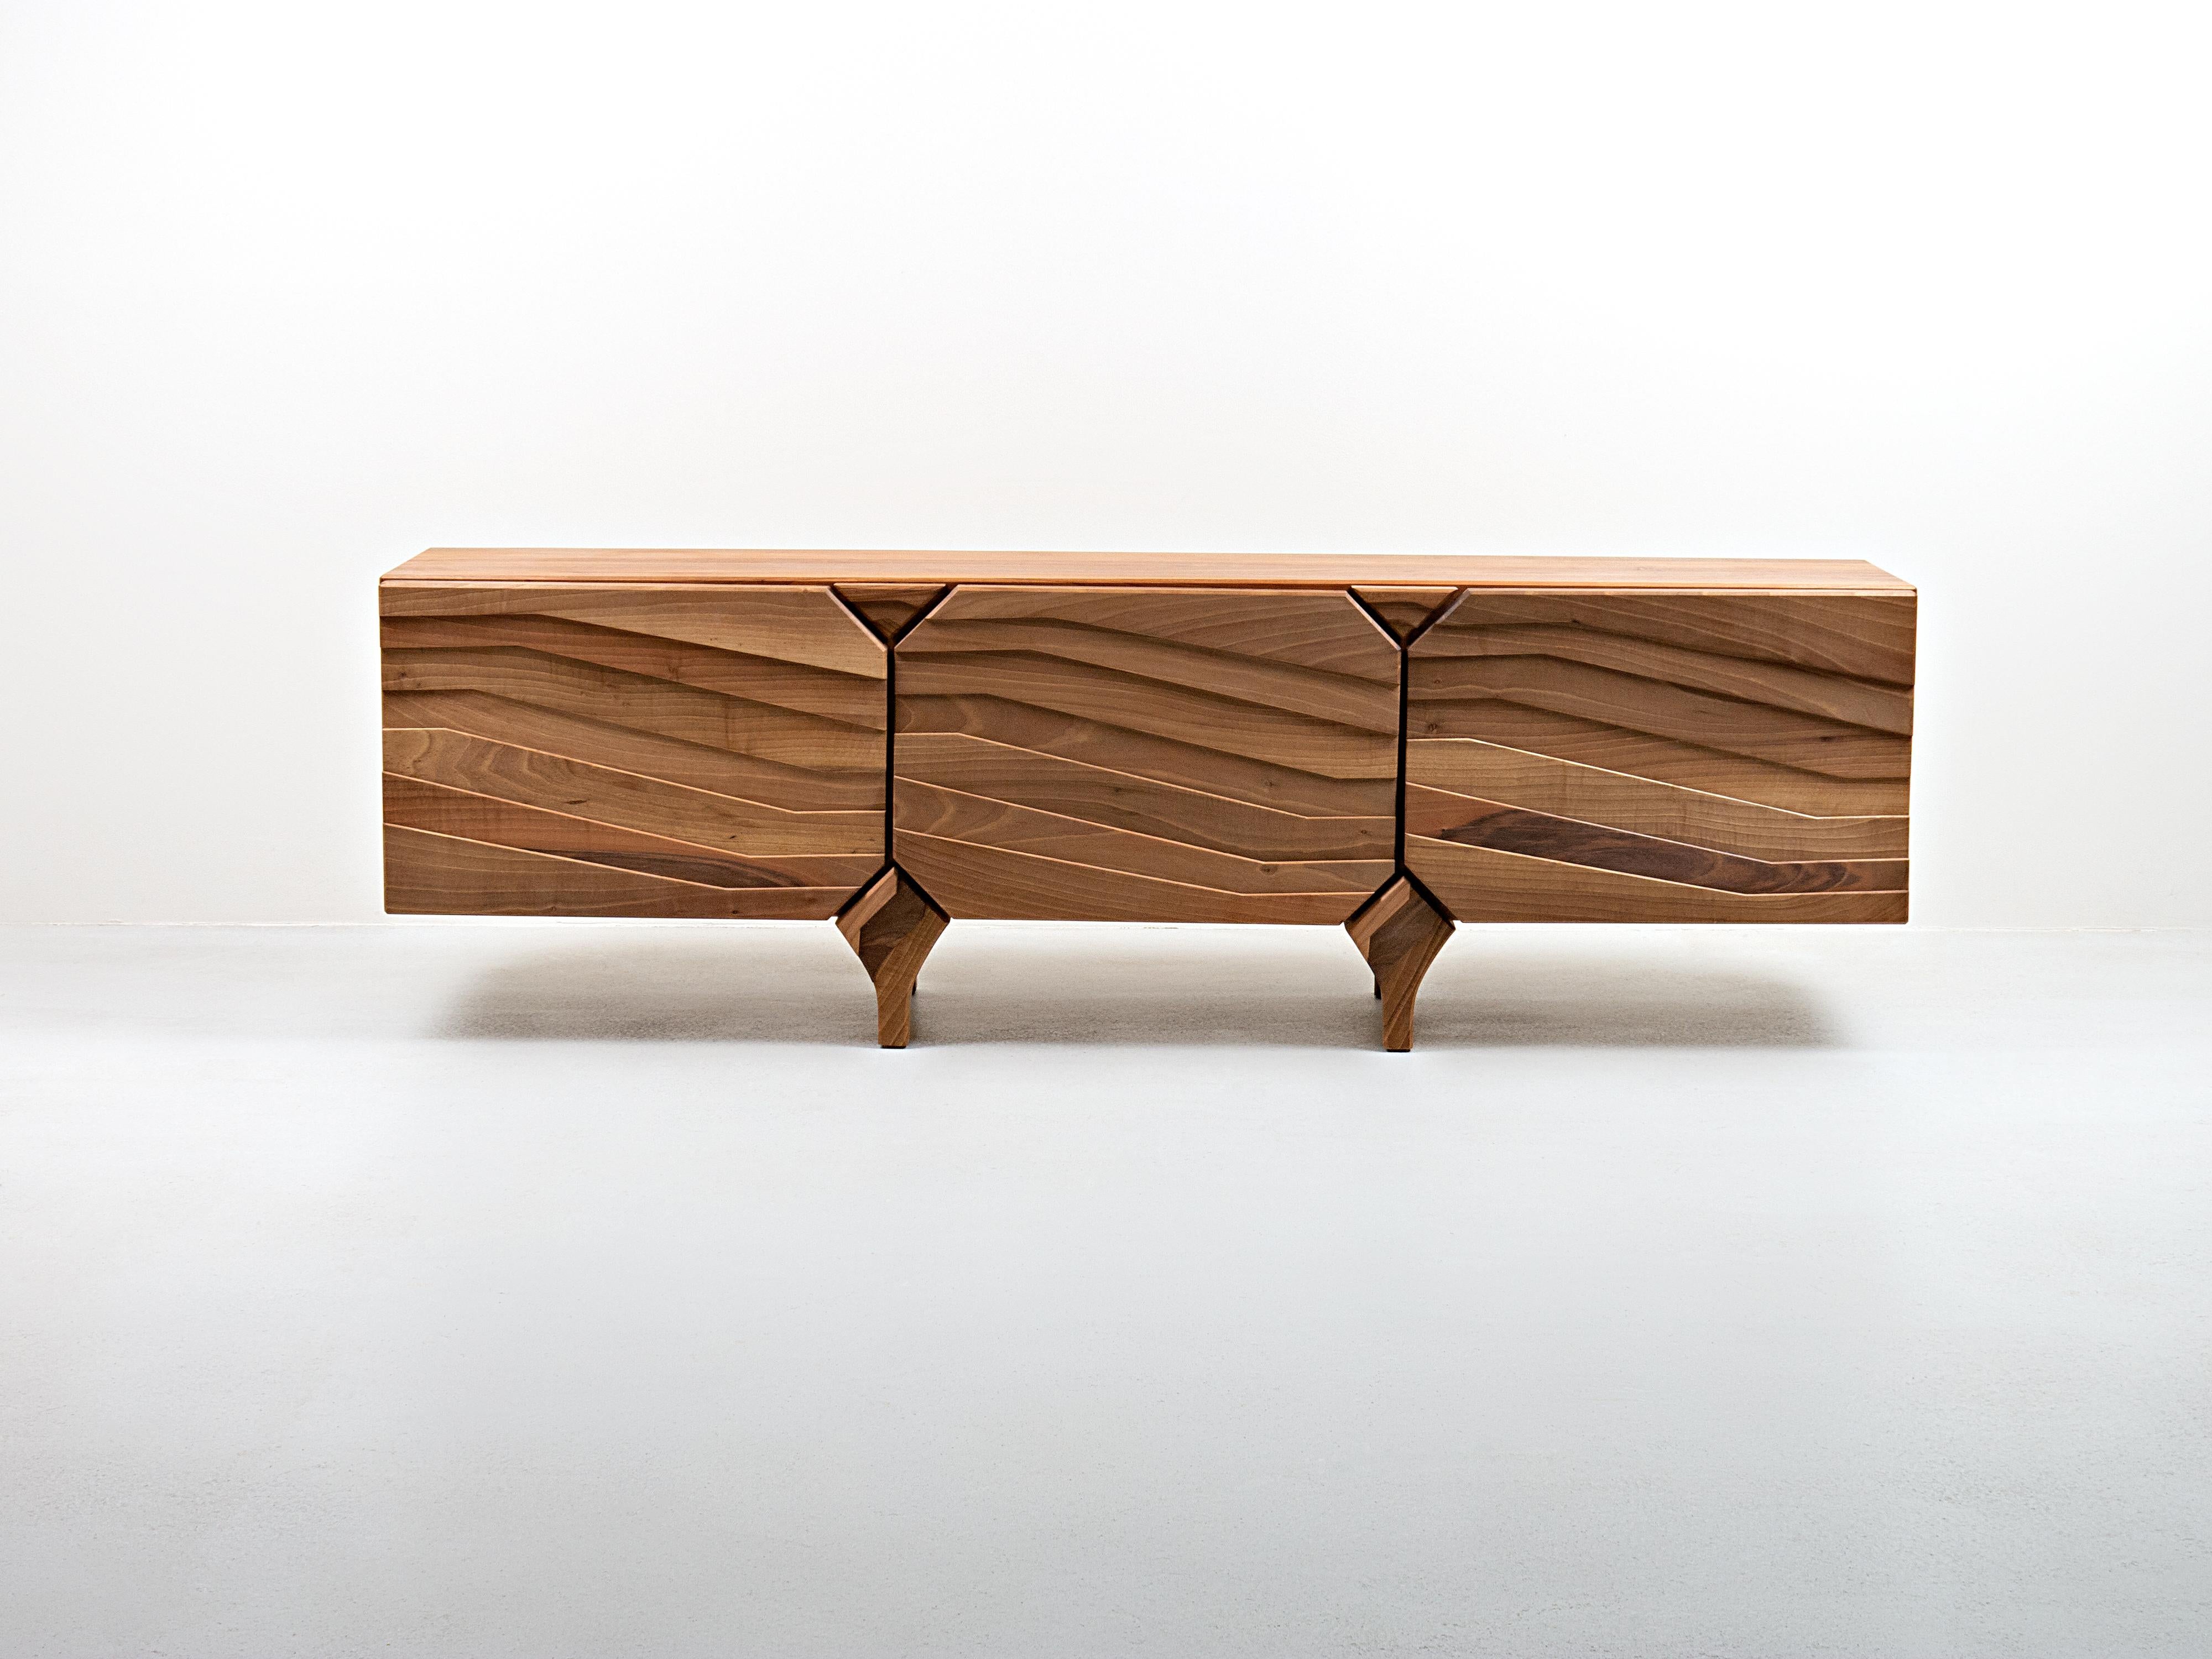 The name of this sidebouard comes from the appearance, that is, profile of its door. The inspiration for the look originates from the old analog camera shutter, where all segments are placed in a similar way as on the door of this chest of drawers.